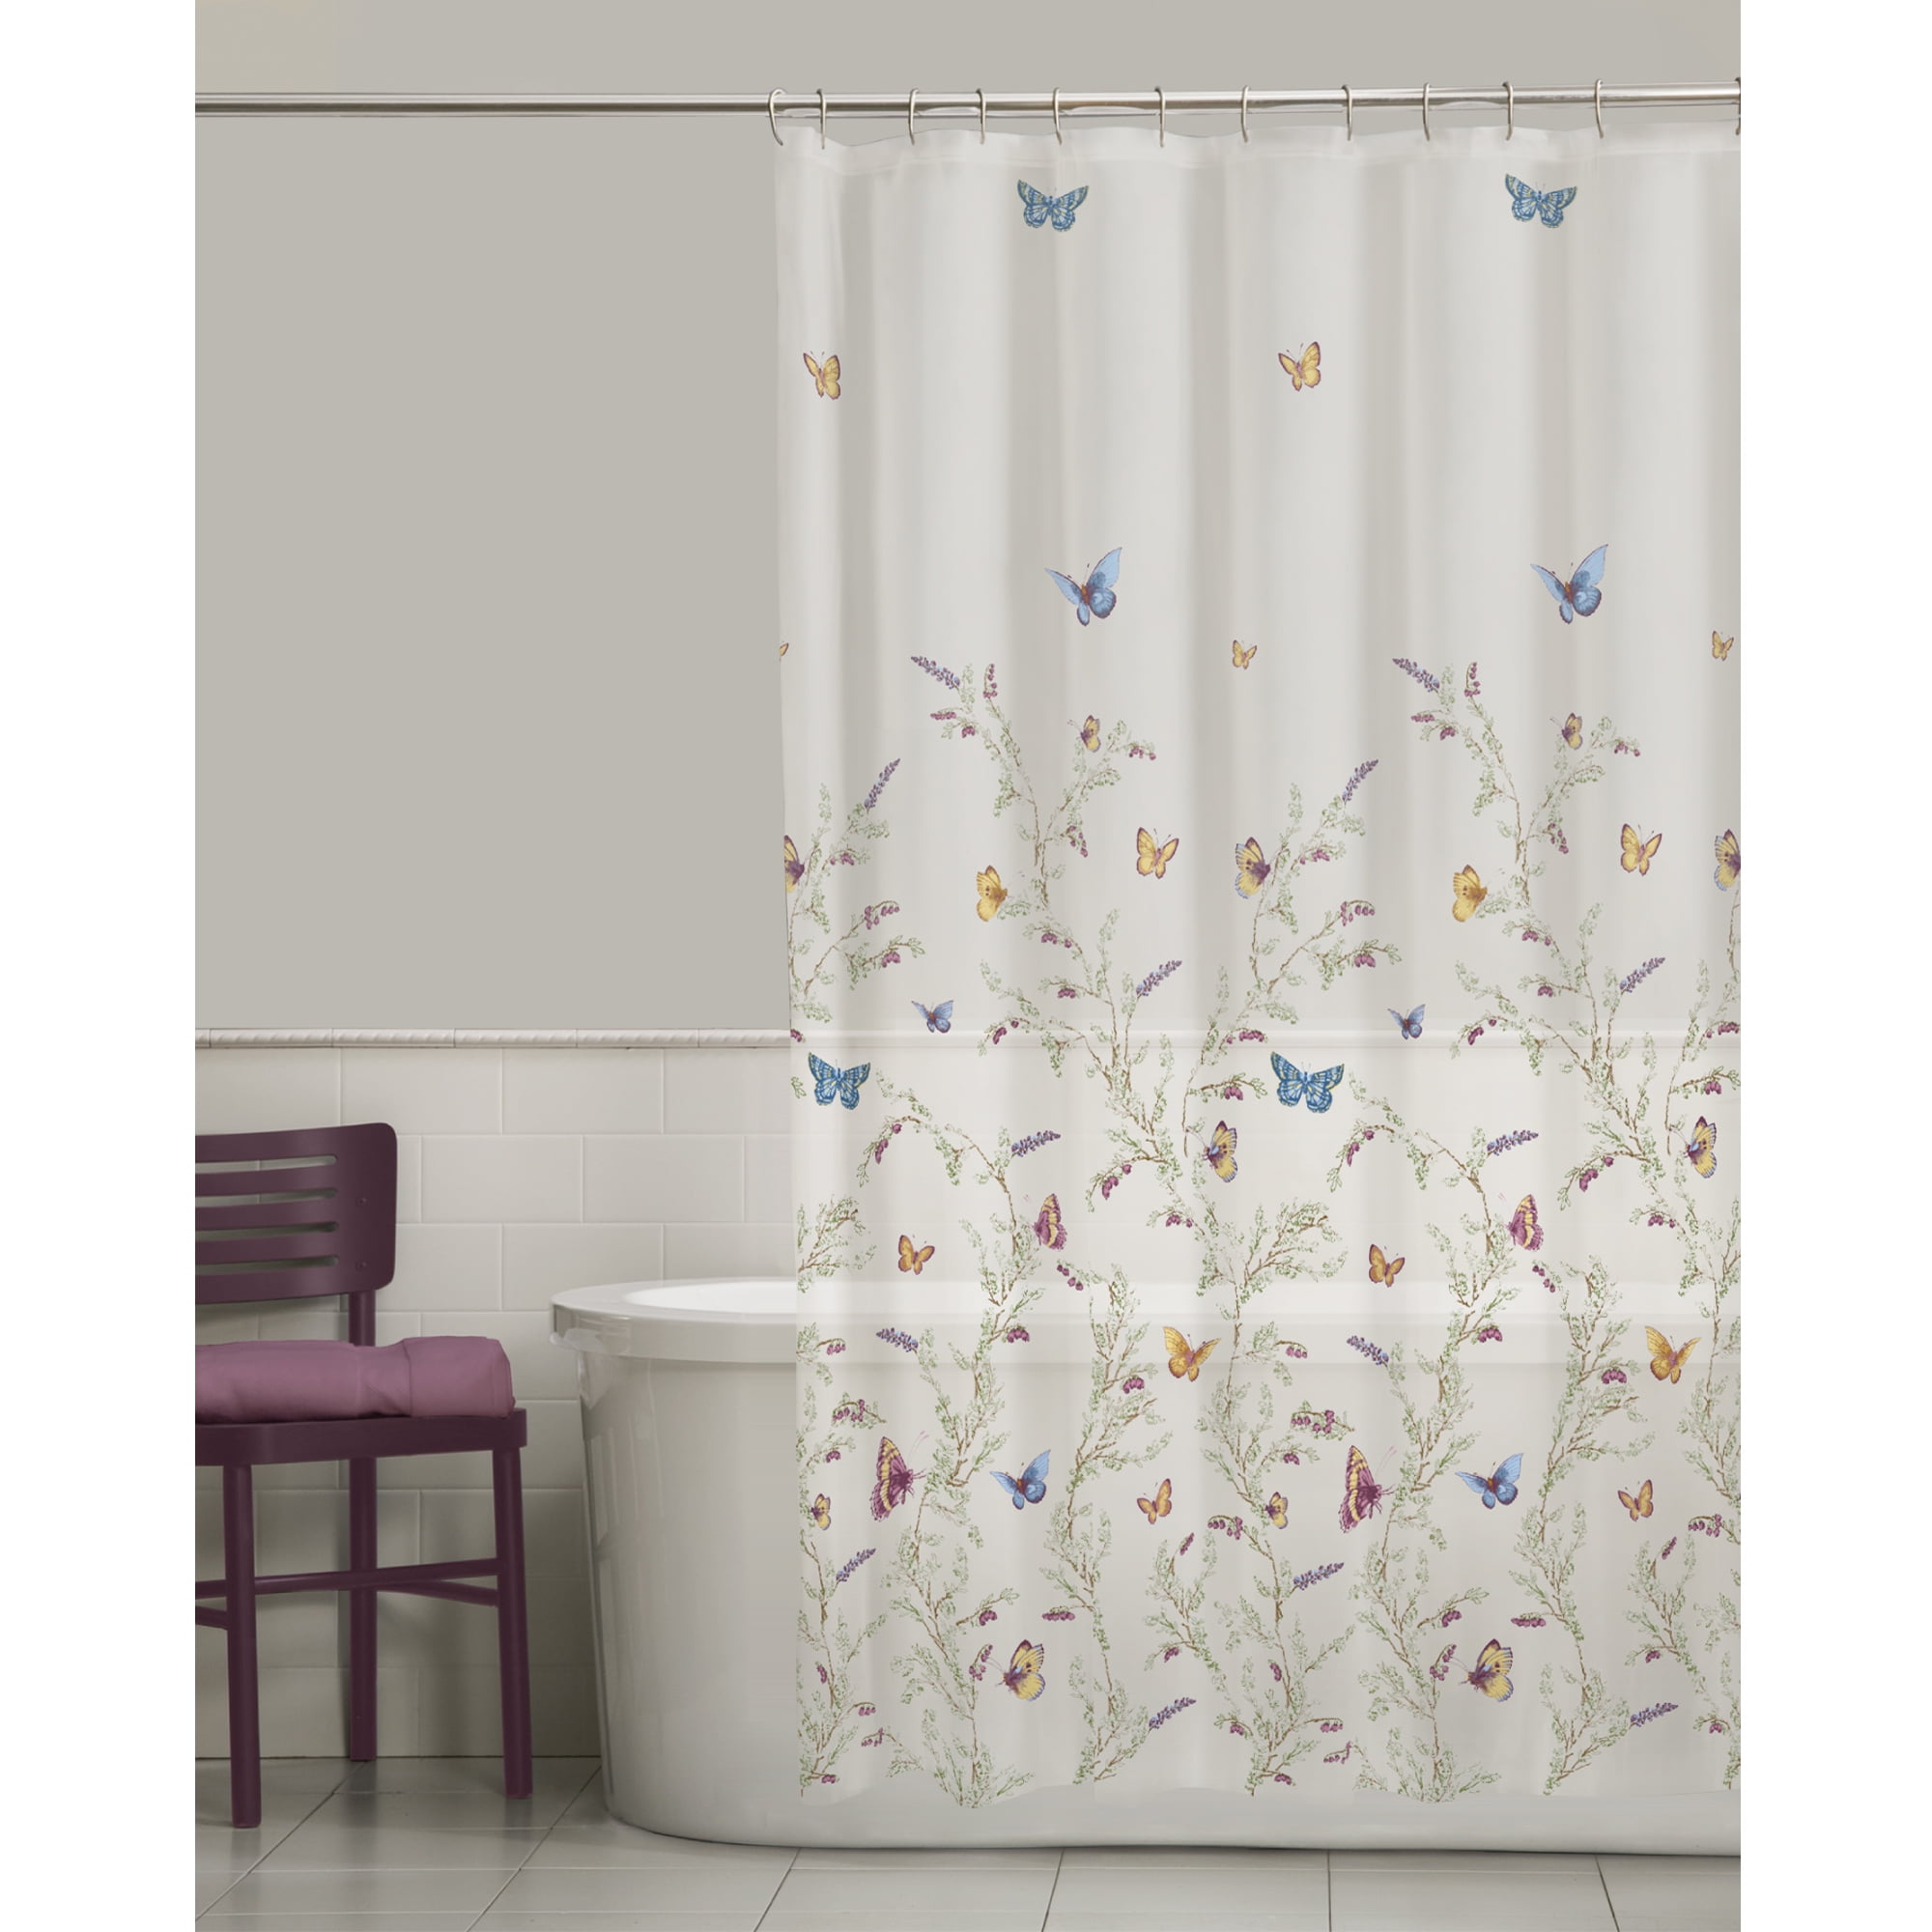 Details about   Mildew Resistant Polyester Fabric Shower Curtain Art Butterfly and Flowers 71'' 